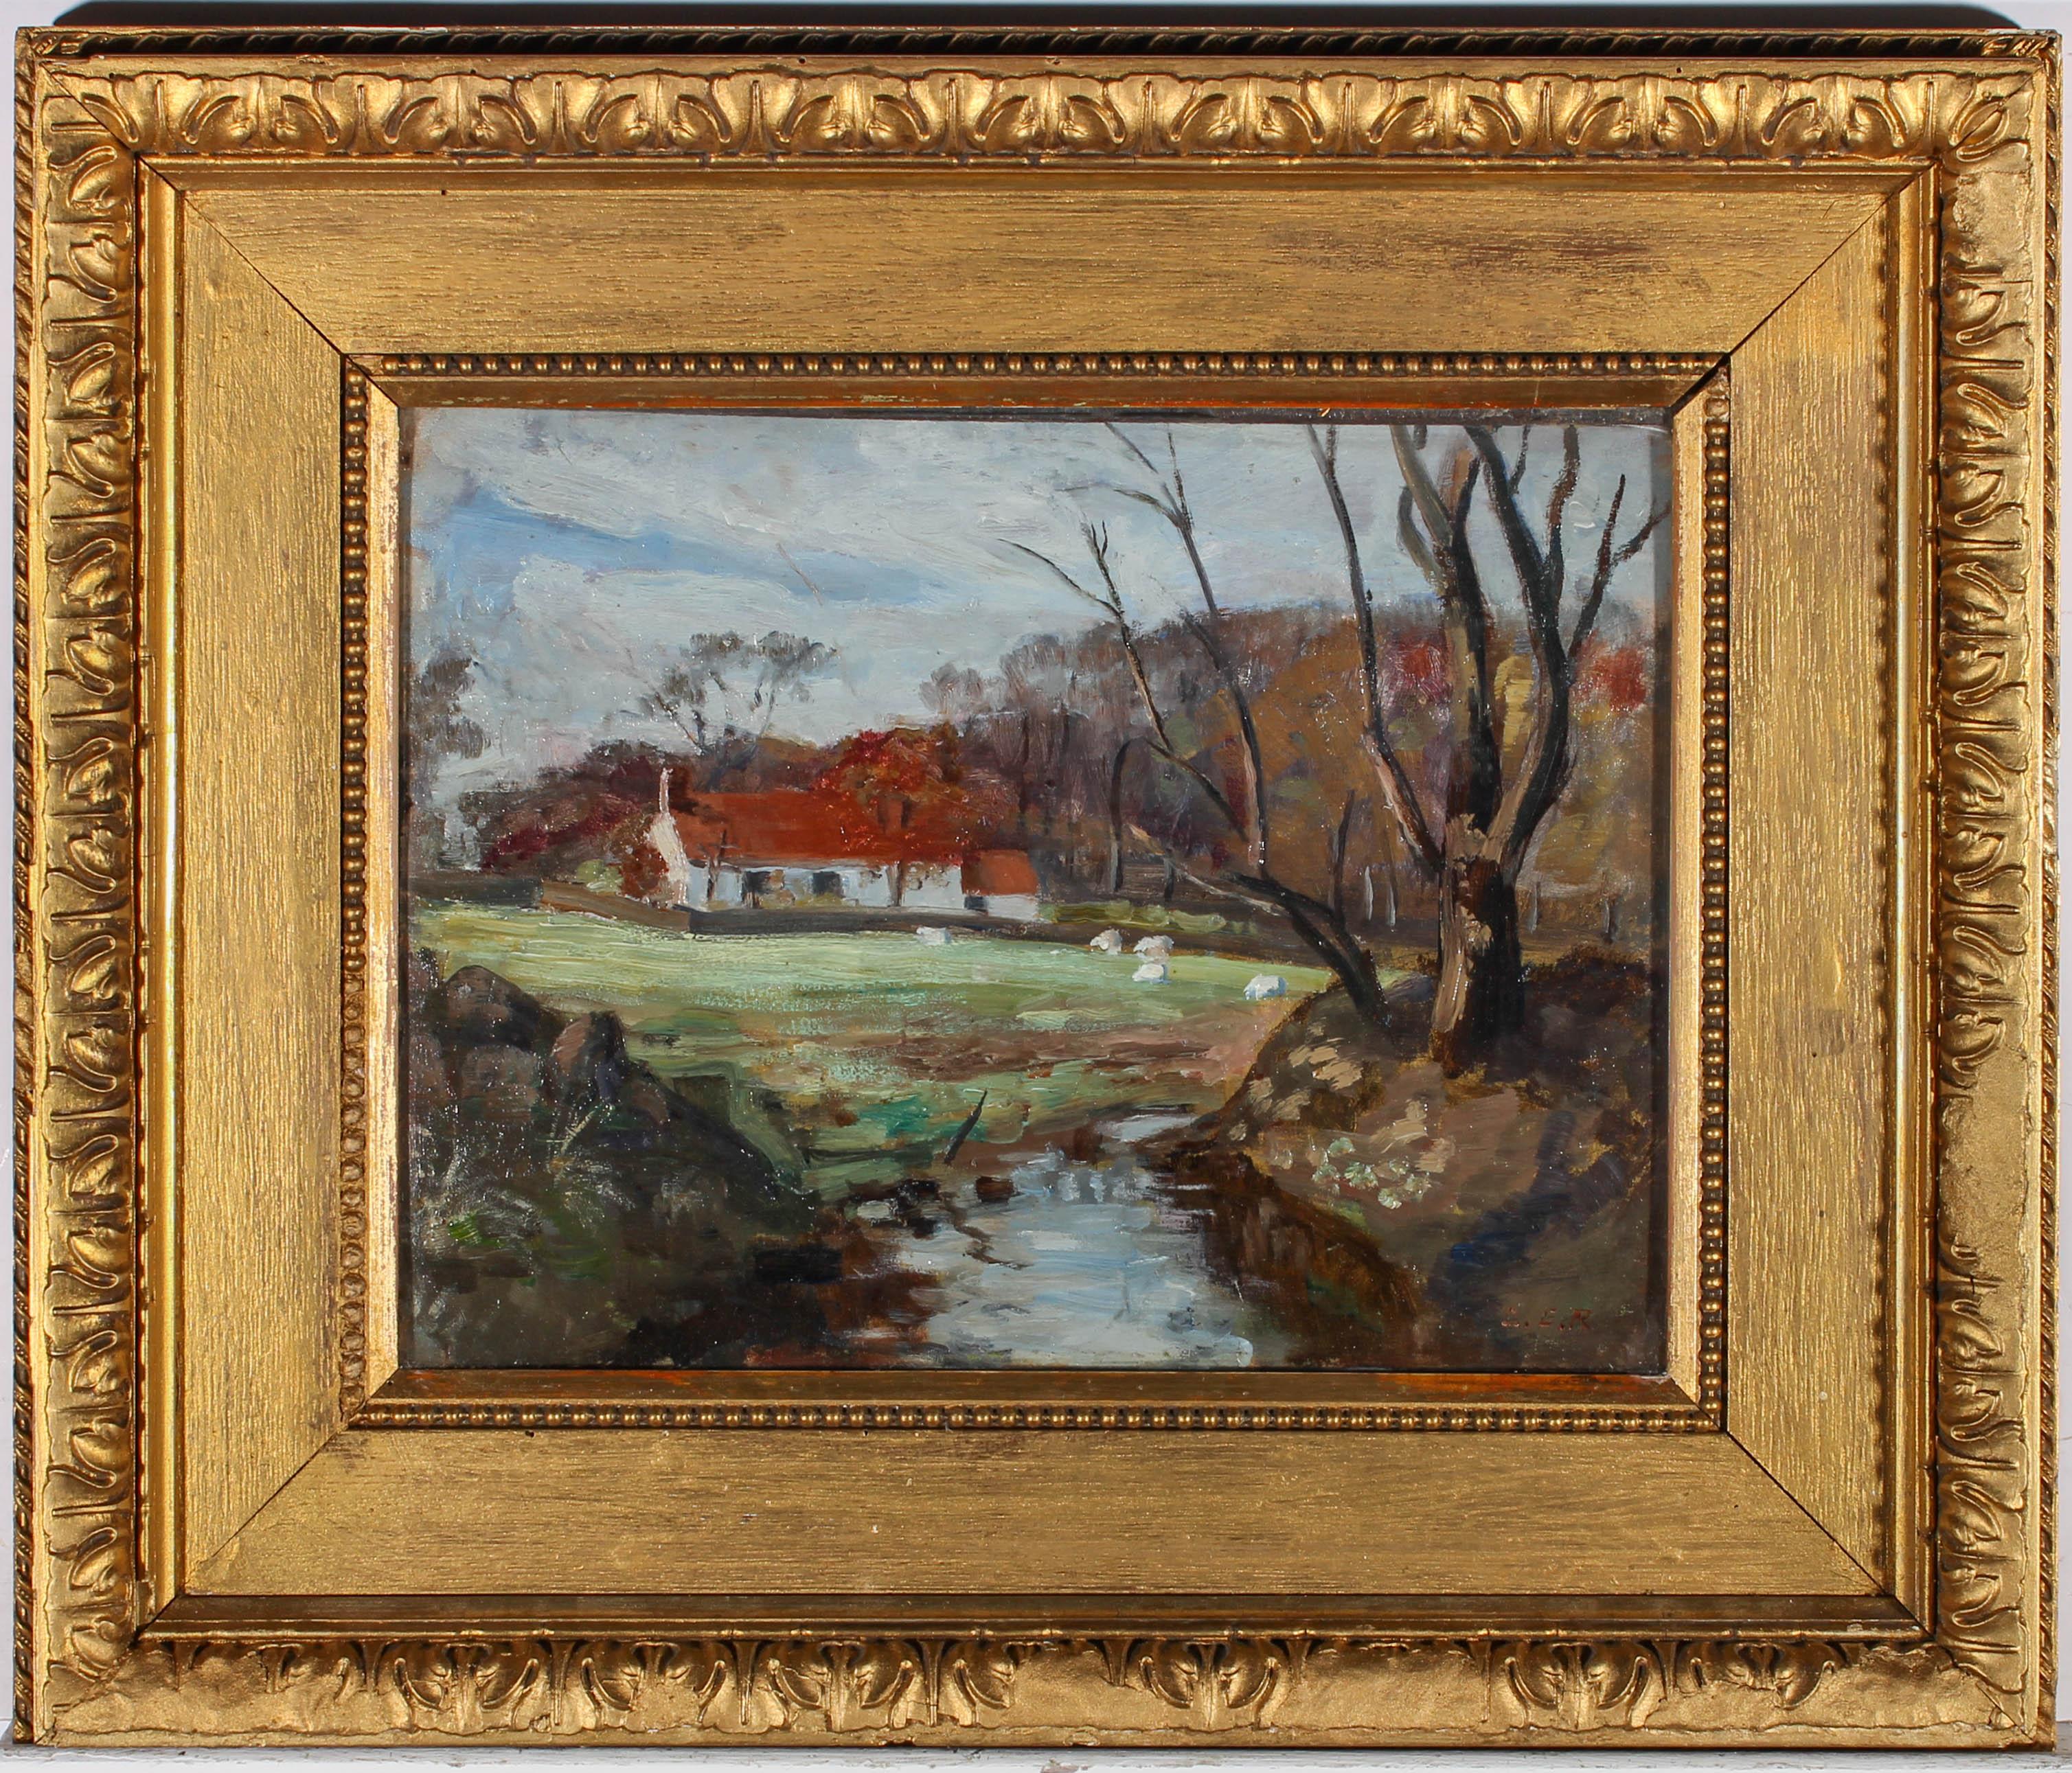 A charming impressionist oil study of a rural cottage surround by grazing animals and a small stream. The artist uses gestural brushstrokes and a rustic colour palette to perfecting capture the atmosphere of this pastoral scene. Signed with initials